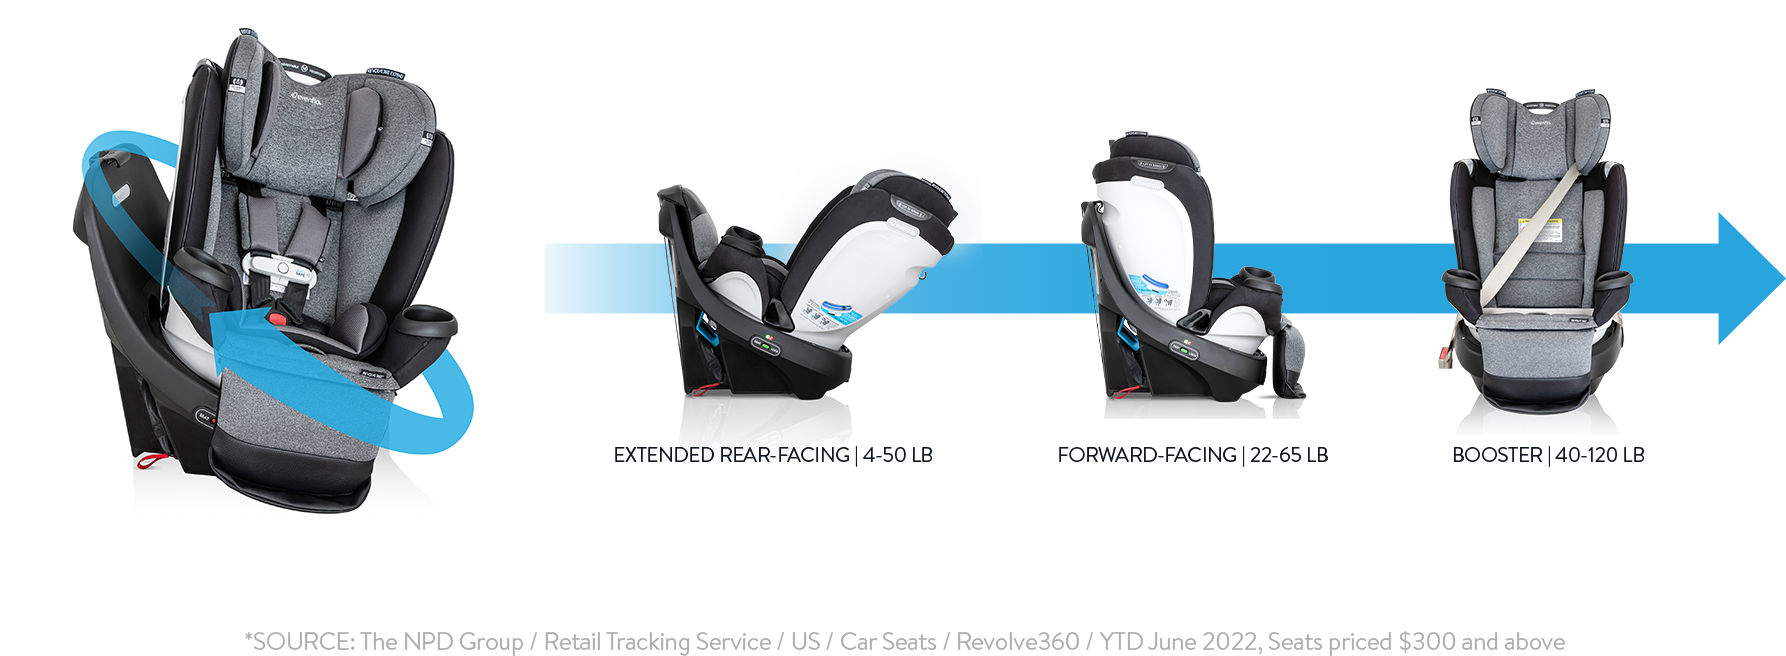 Image of Revolve360 Extend Rotational All-in-One Car Seat with arrow around seat indicating rotational feature. Extended rear-facing: 4 to 50 pounds. Forward-facing: 22 to 65 pounds. Booster: 40 to 120 pounds.